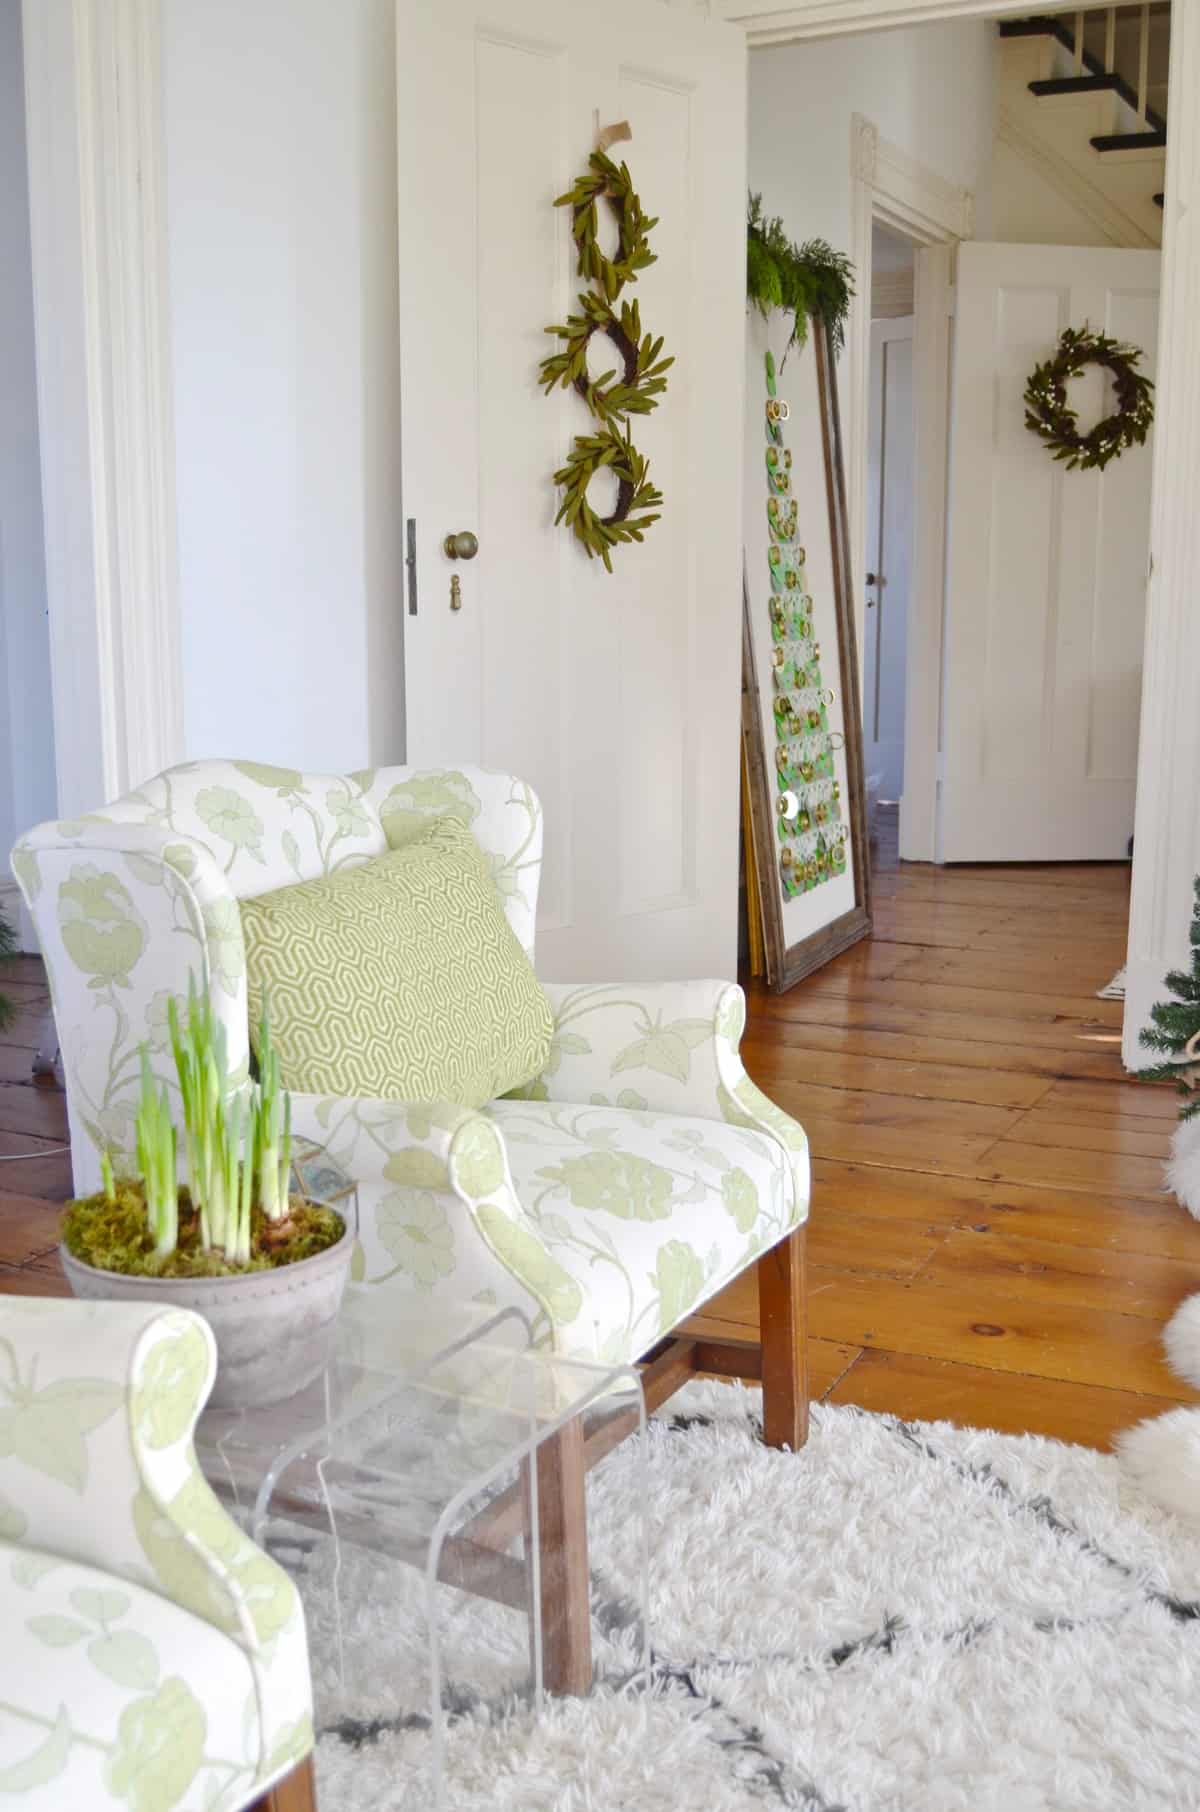 New England holiday house tour with lots of Christmas trees and classic red accents.